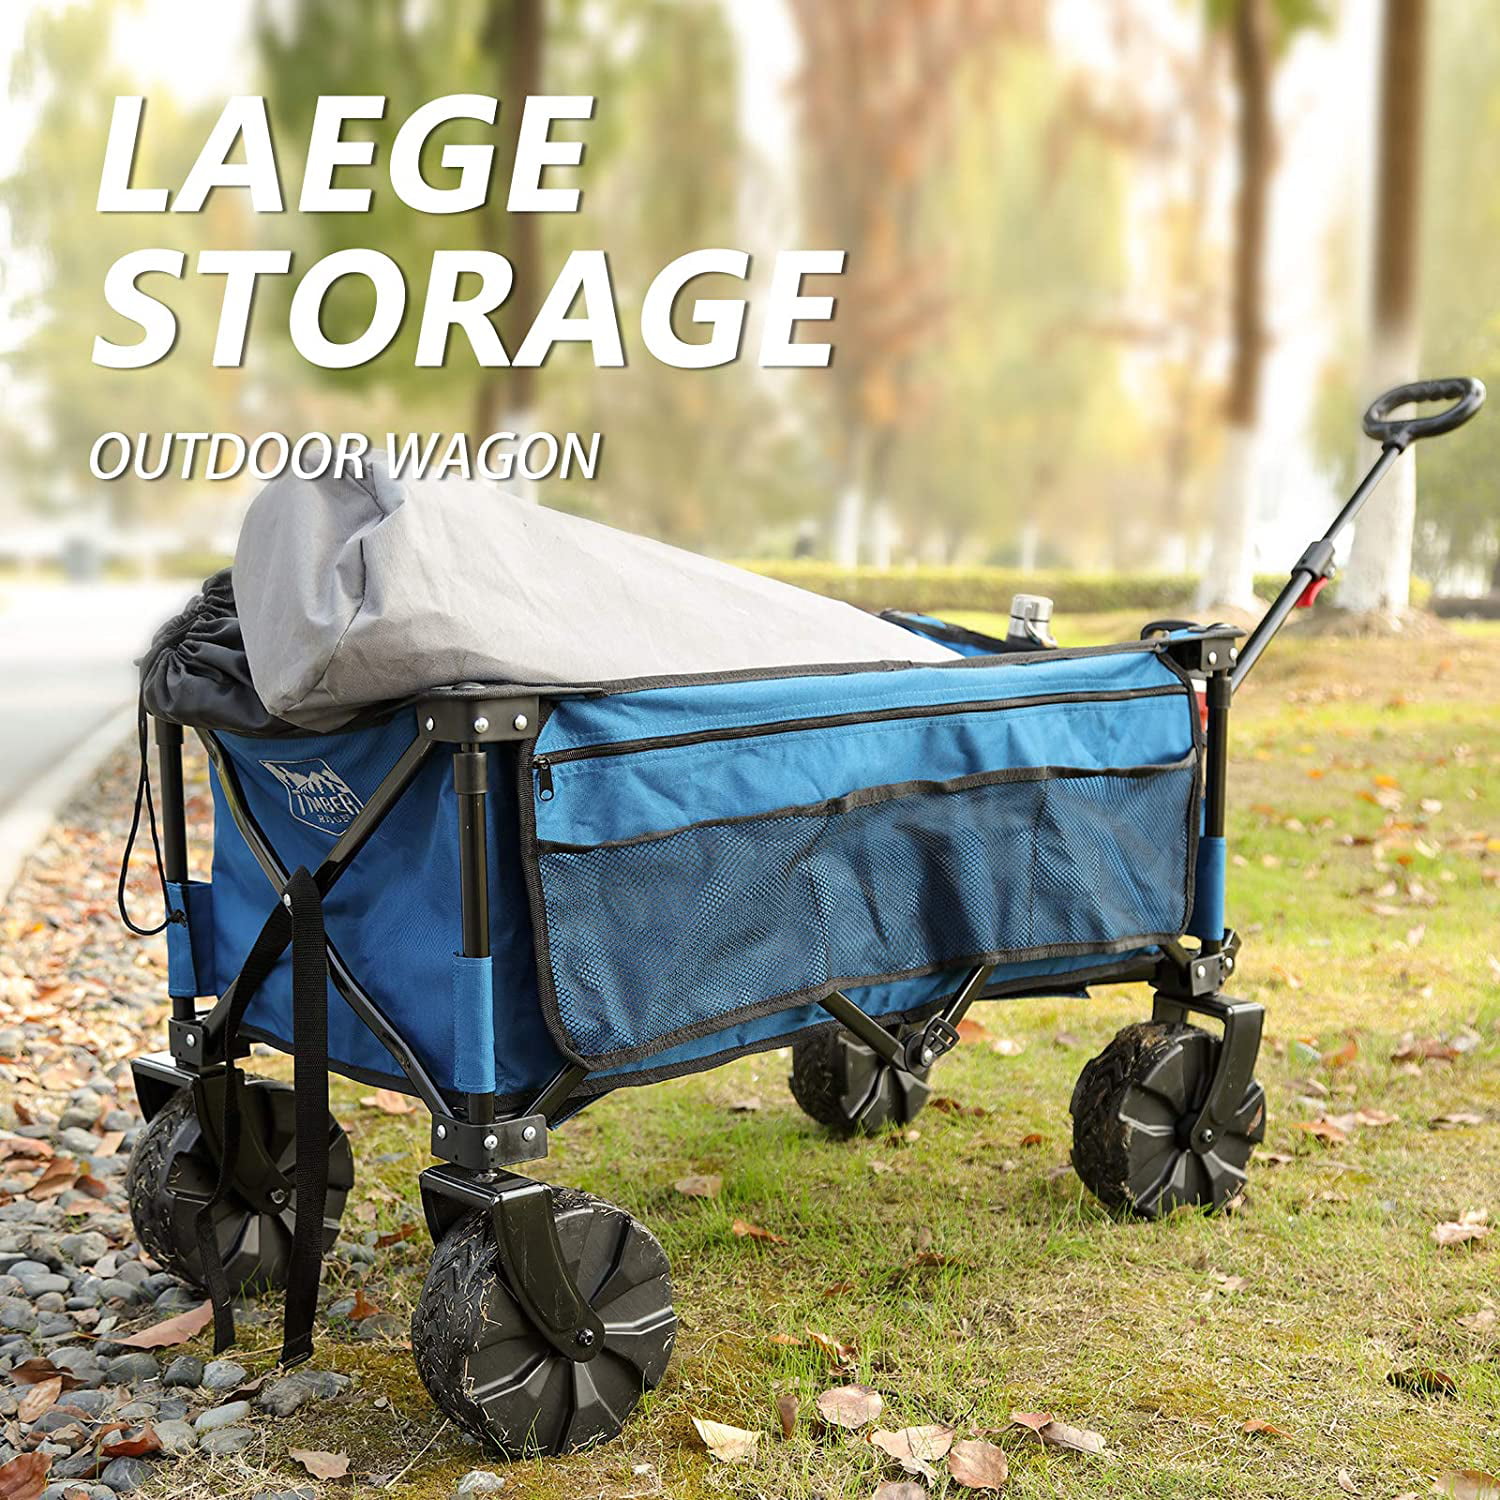 Side Bag Timber Ridge Camping Wagon Folding Garden Cart Shopping Trolley Collapsible Heavy Duty Utility Use Blue 